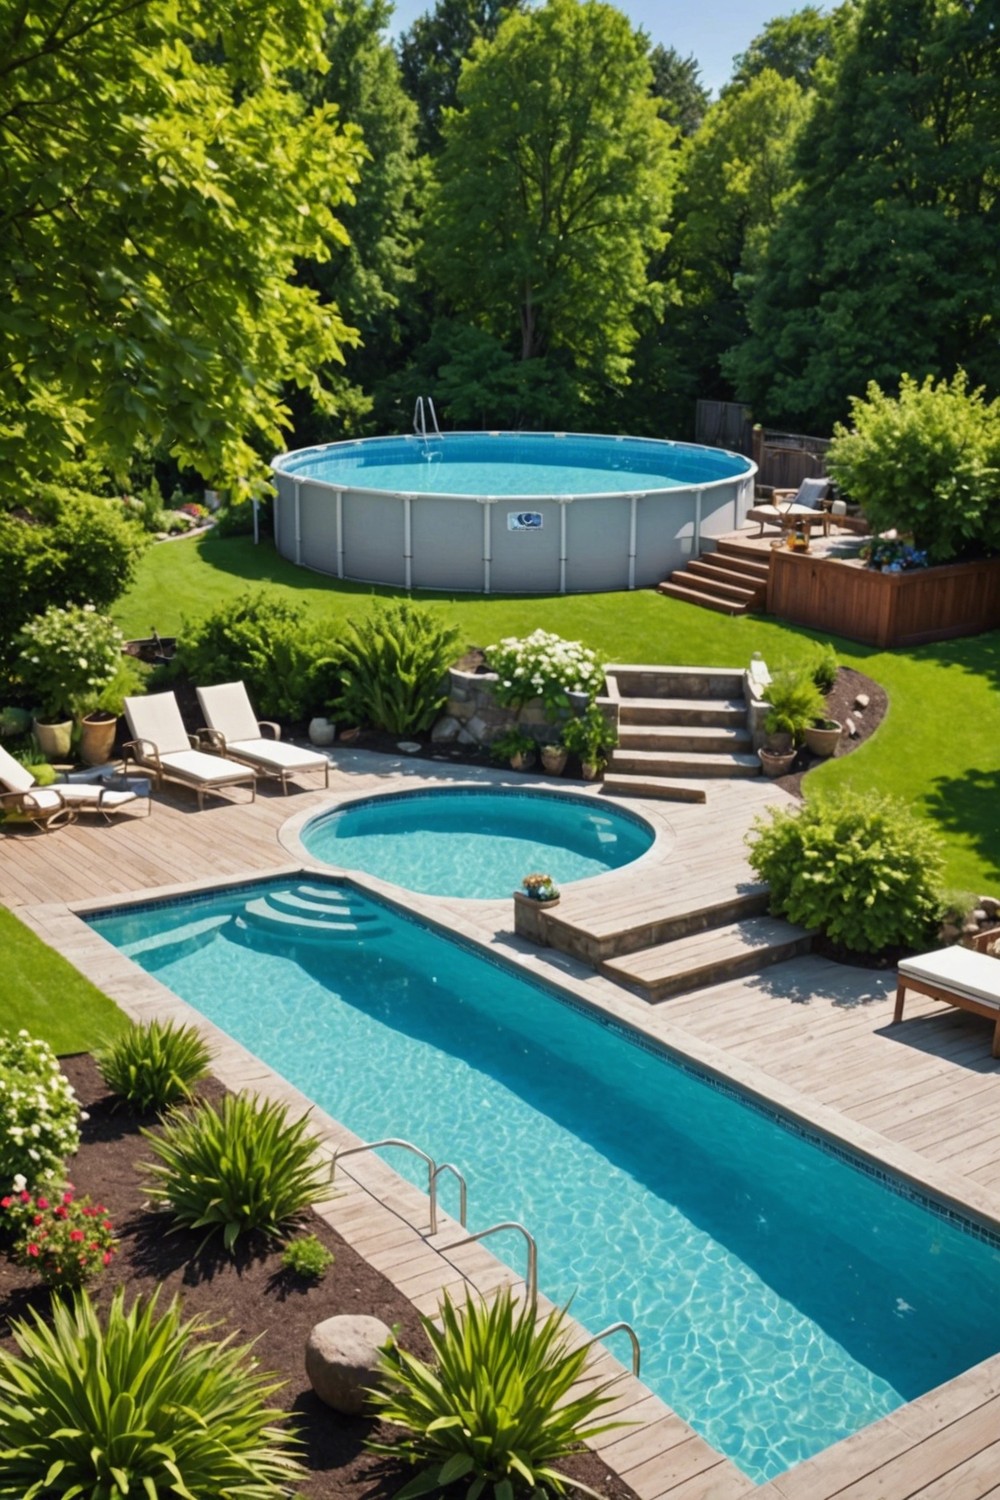 Pool-to-Deck Steps with Wide Treads